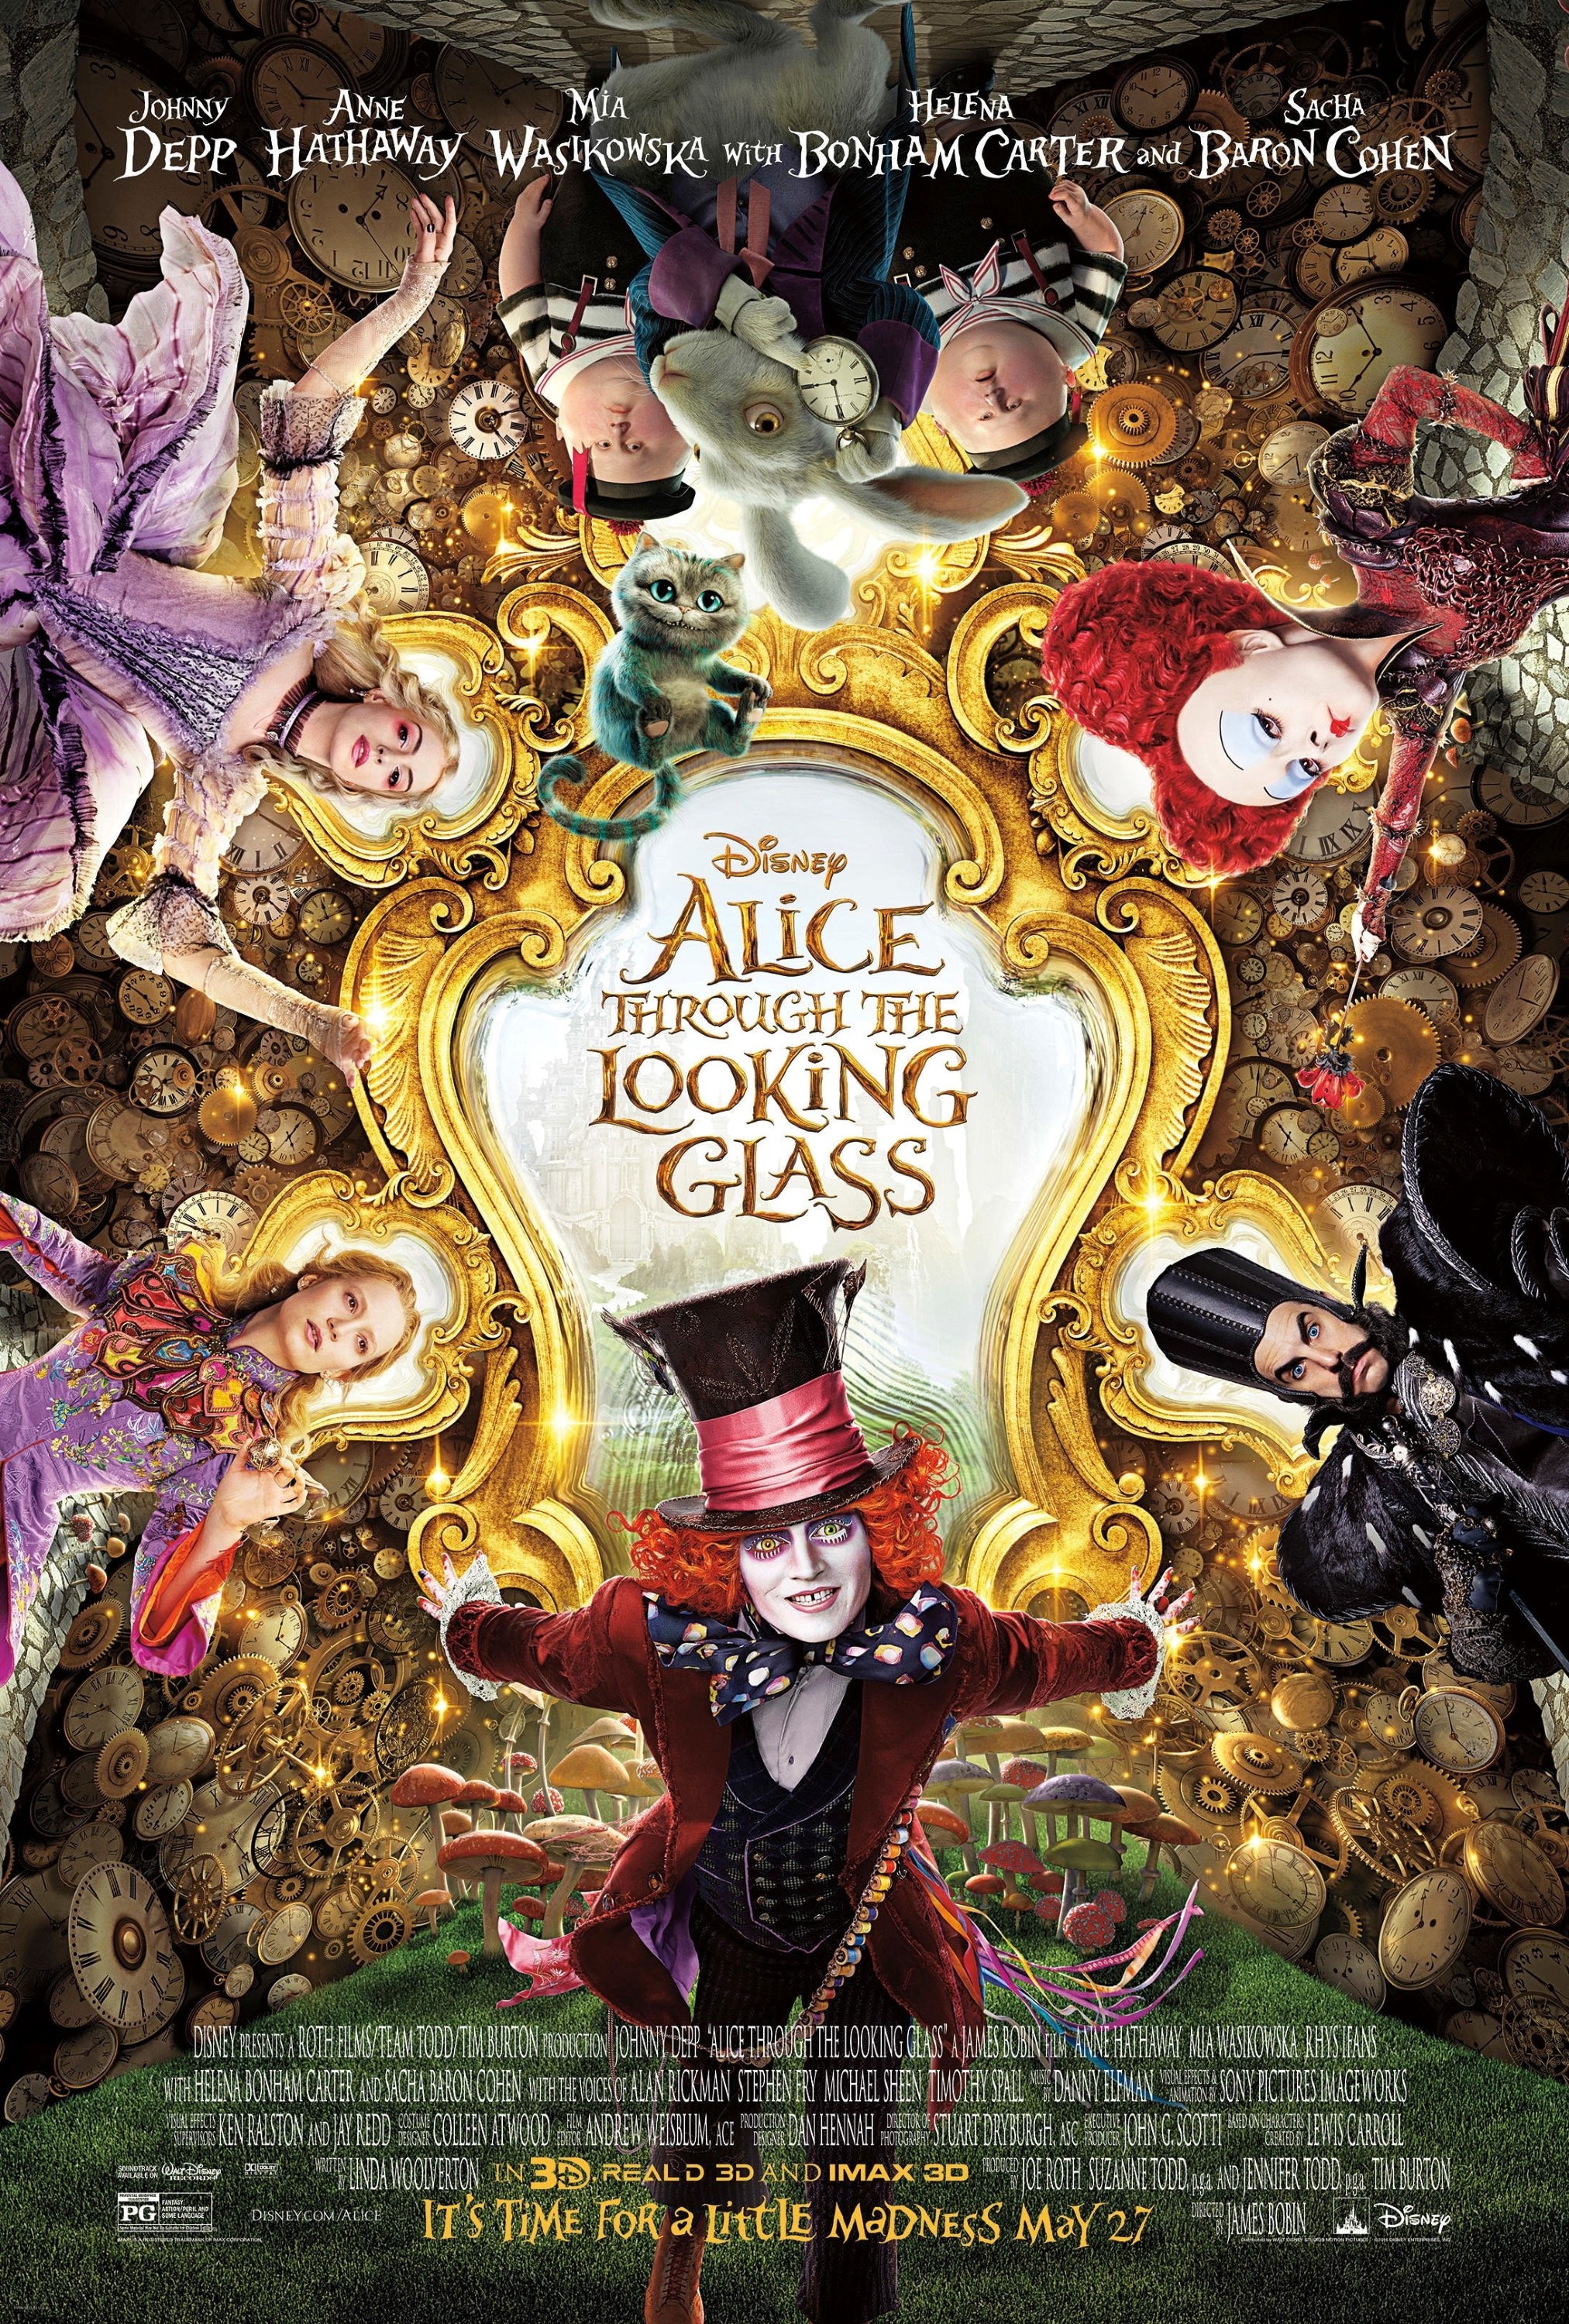 https://static.wikia.nocookie.net/disney/images/9/95/Alice_Through_the_Looking_Glass_-_Poster.jpg/revision/latest?cb=20230405233832